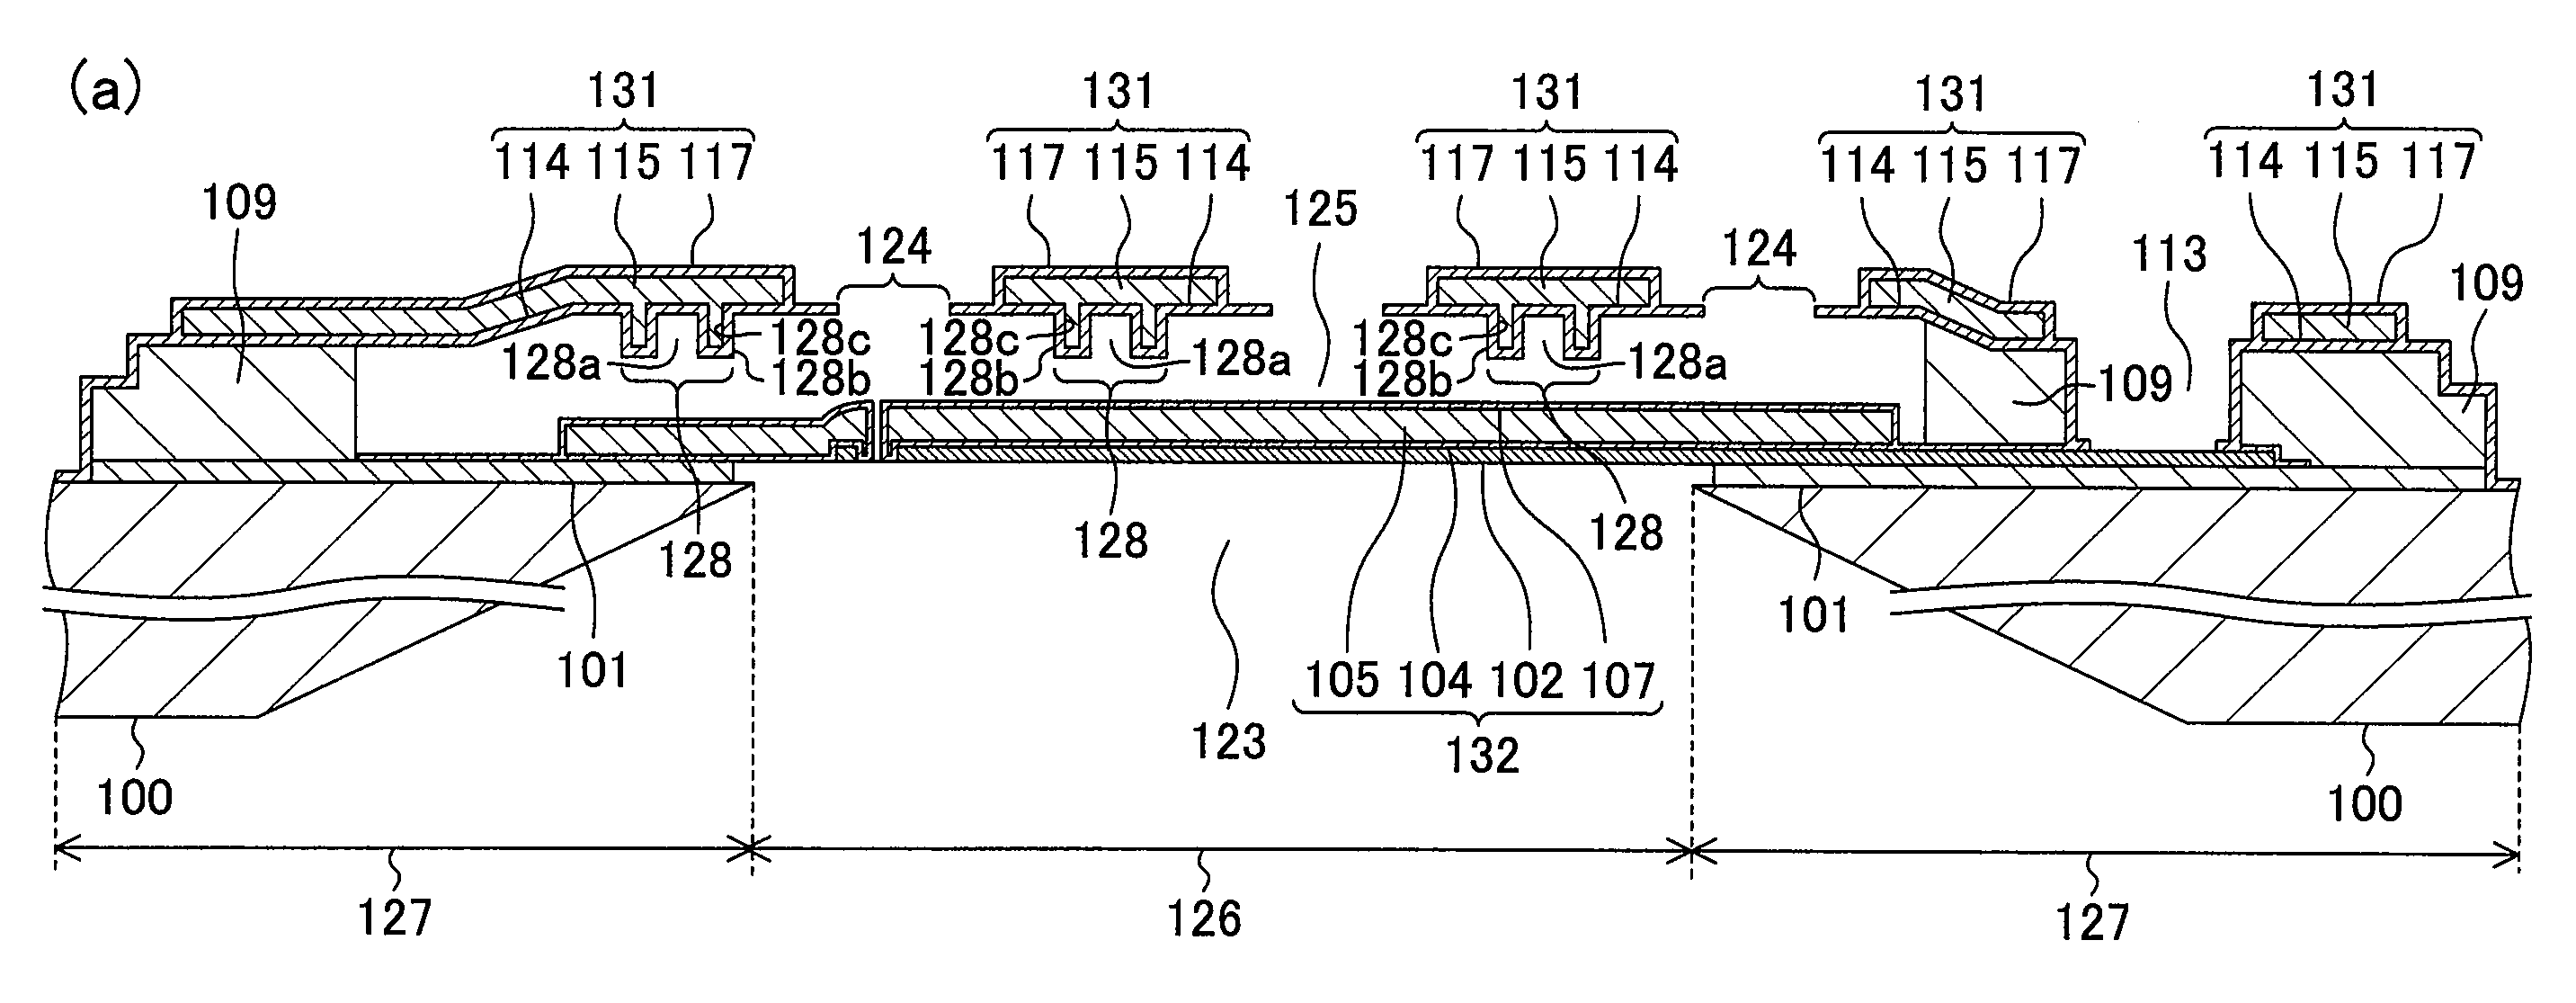 Condenser microphone and MEMS device